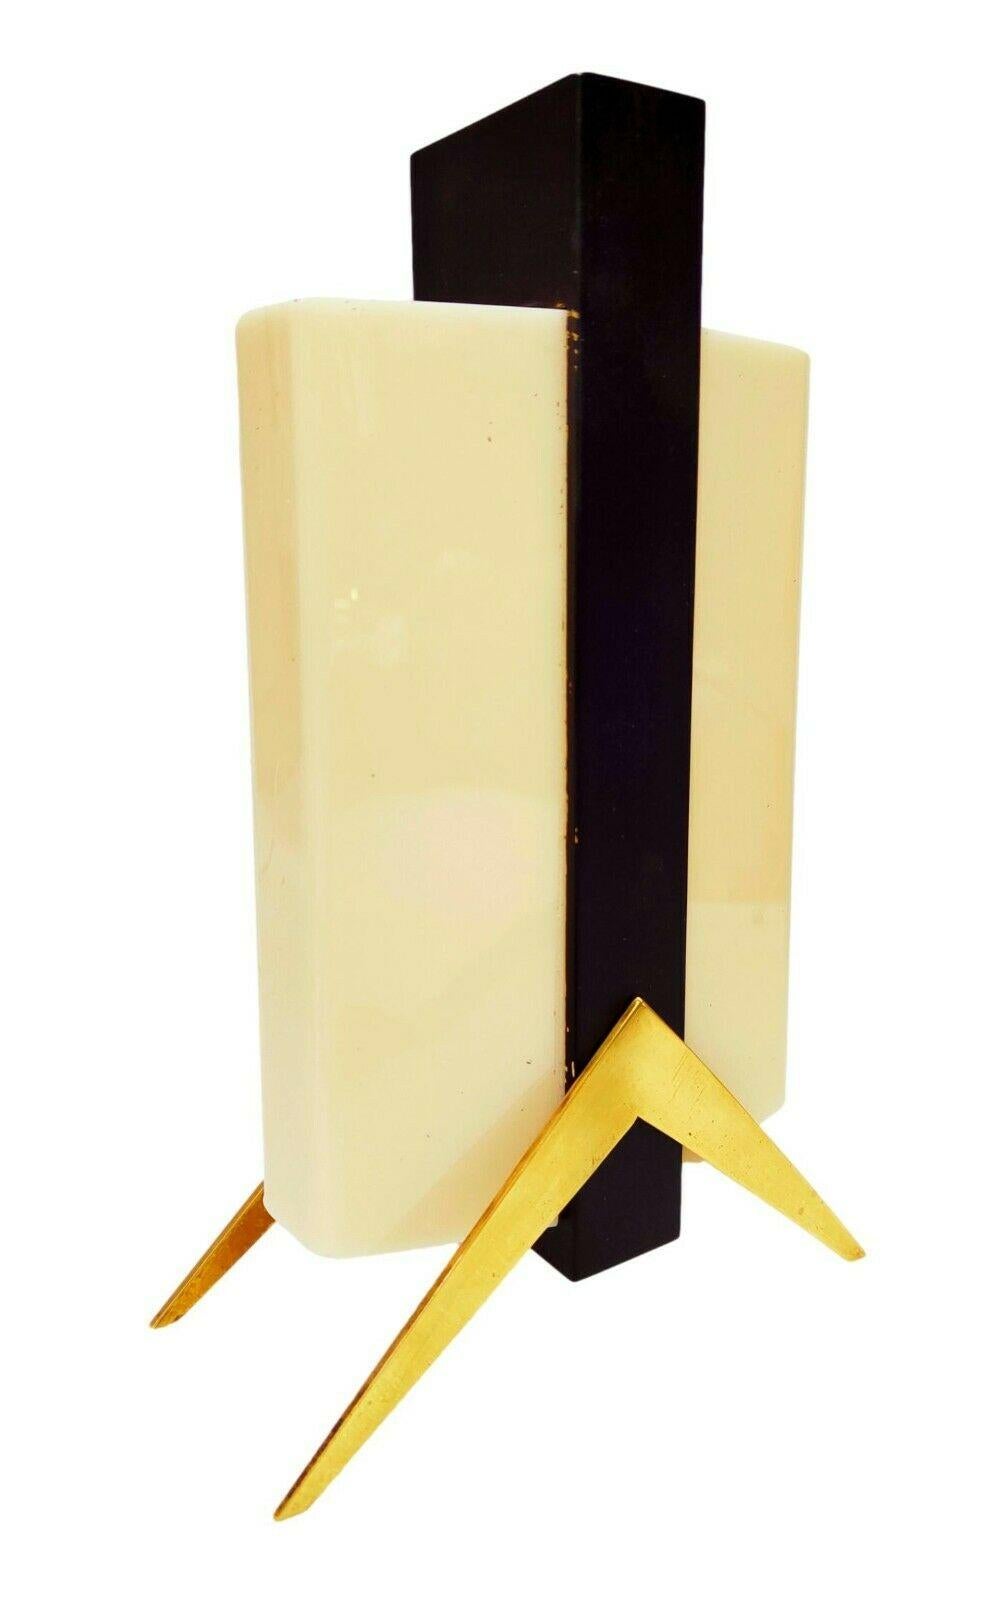 Italian Vintage Table Lamp, Gio Ponti Style, in Plexiglass and Brass, 1960s